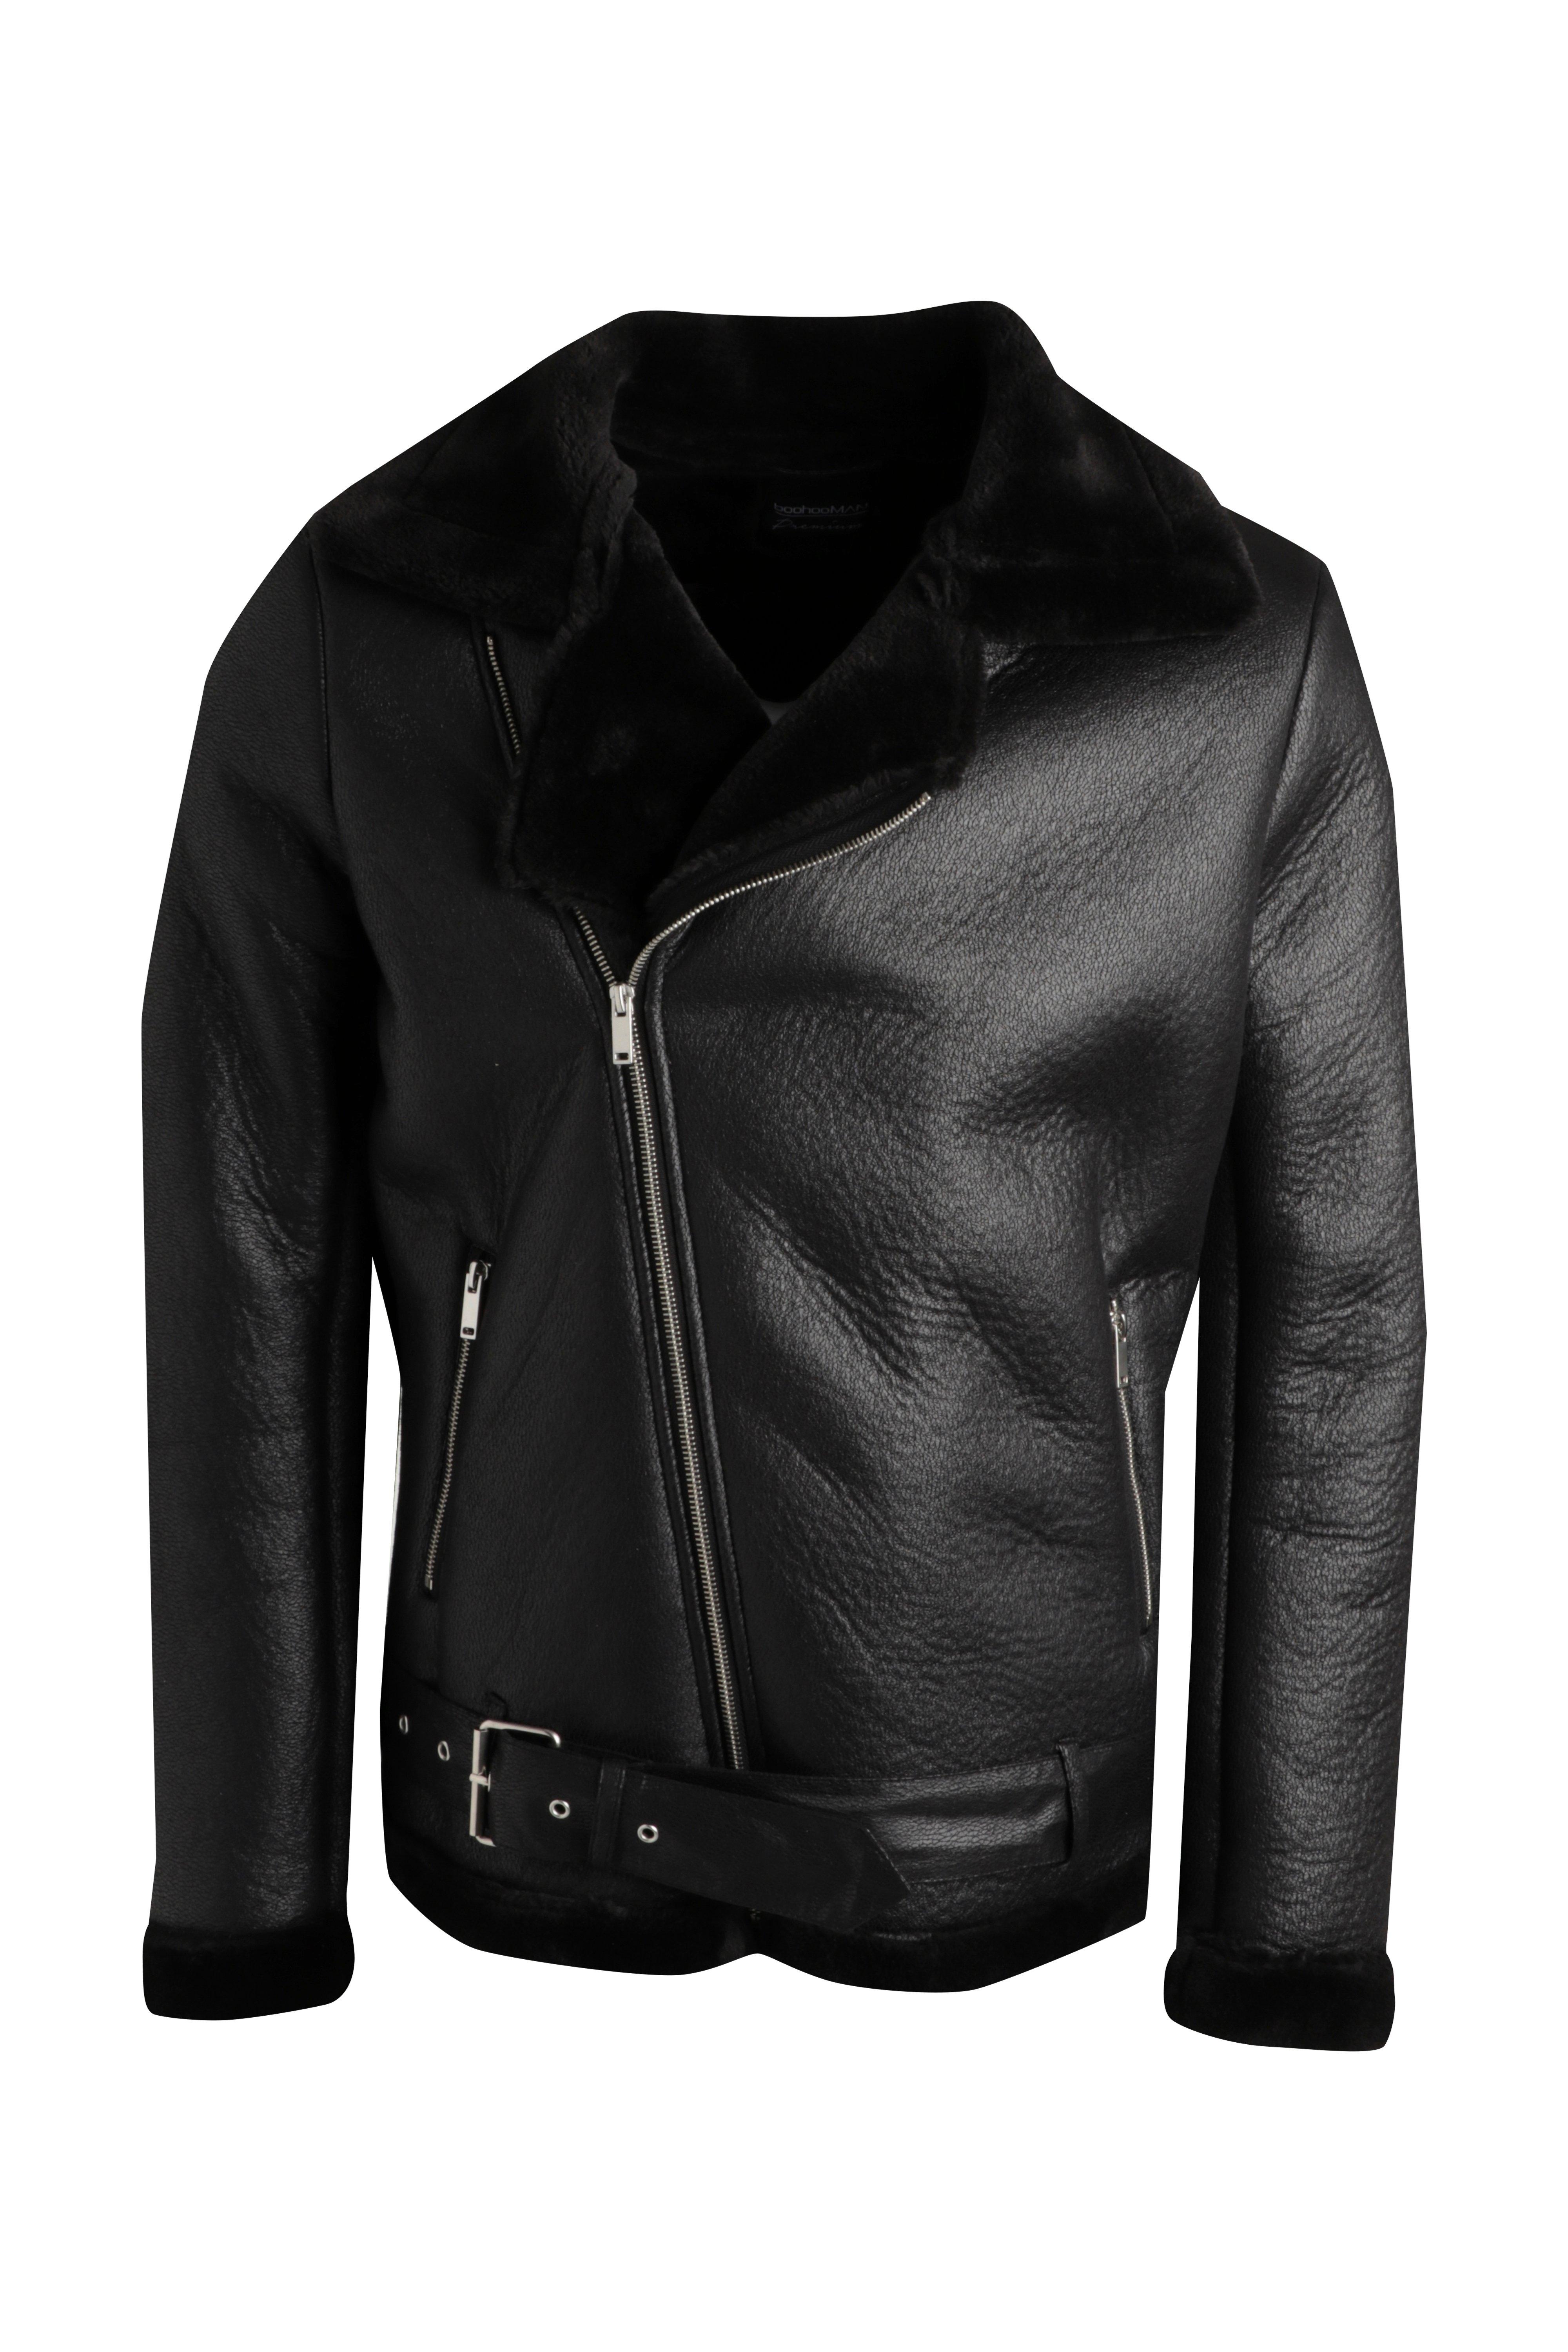 boohooMAN Reversible Leather Look and Borg Aviator - Black - Size S